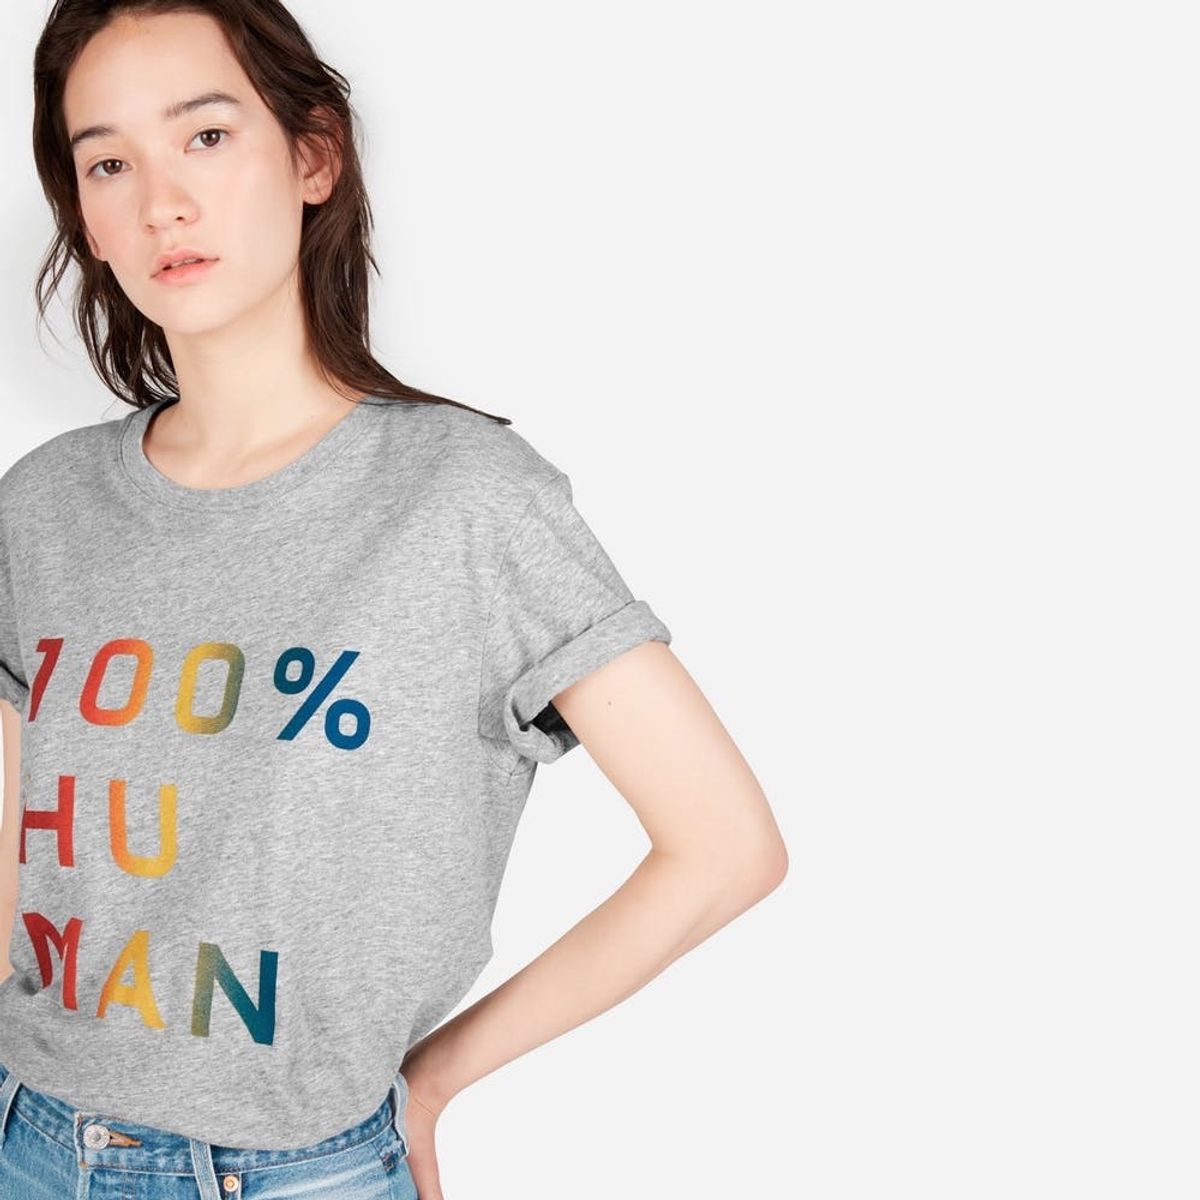 Pride Month Merch That Actually Gives Back to LGBTQ+ Organizations